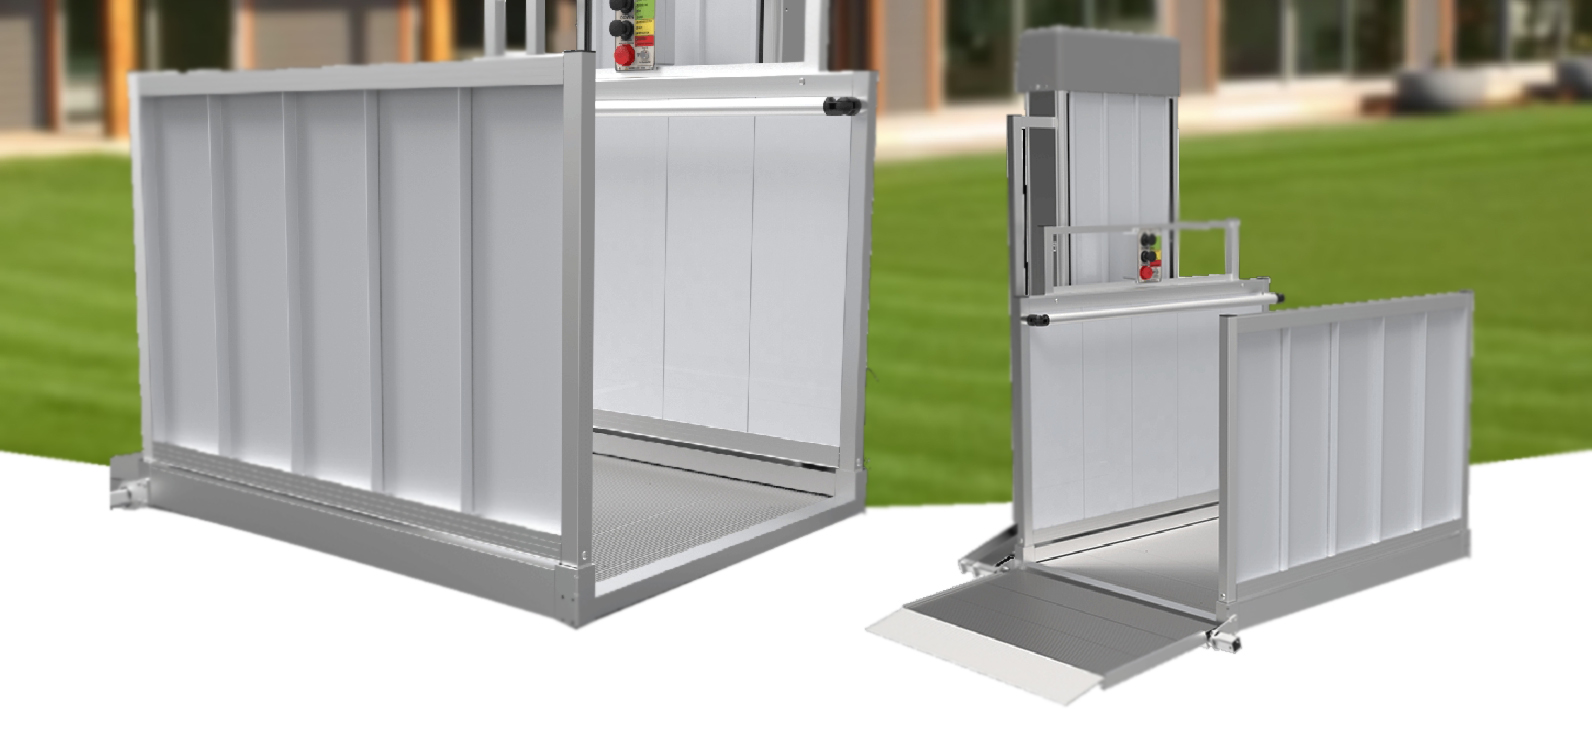 Installing Passport Vertical Lifts Make Disabled-Access Easy